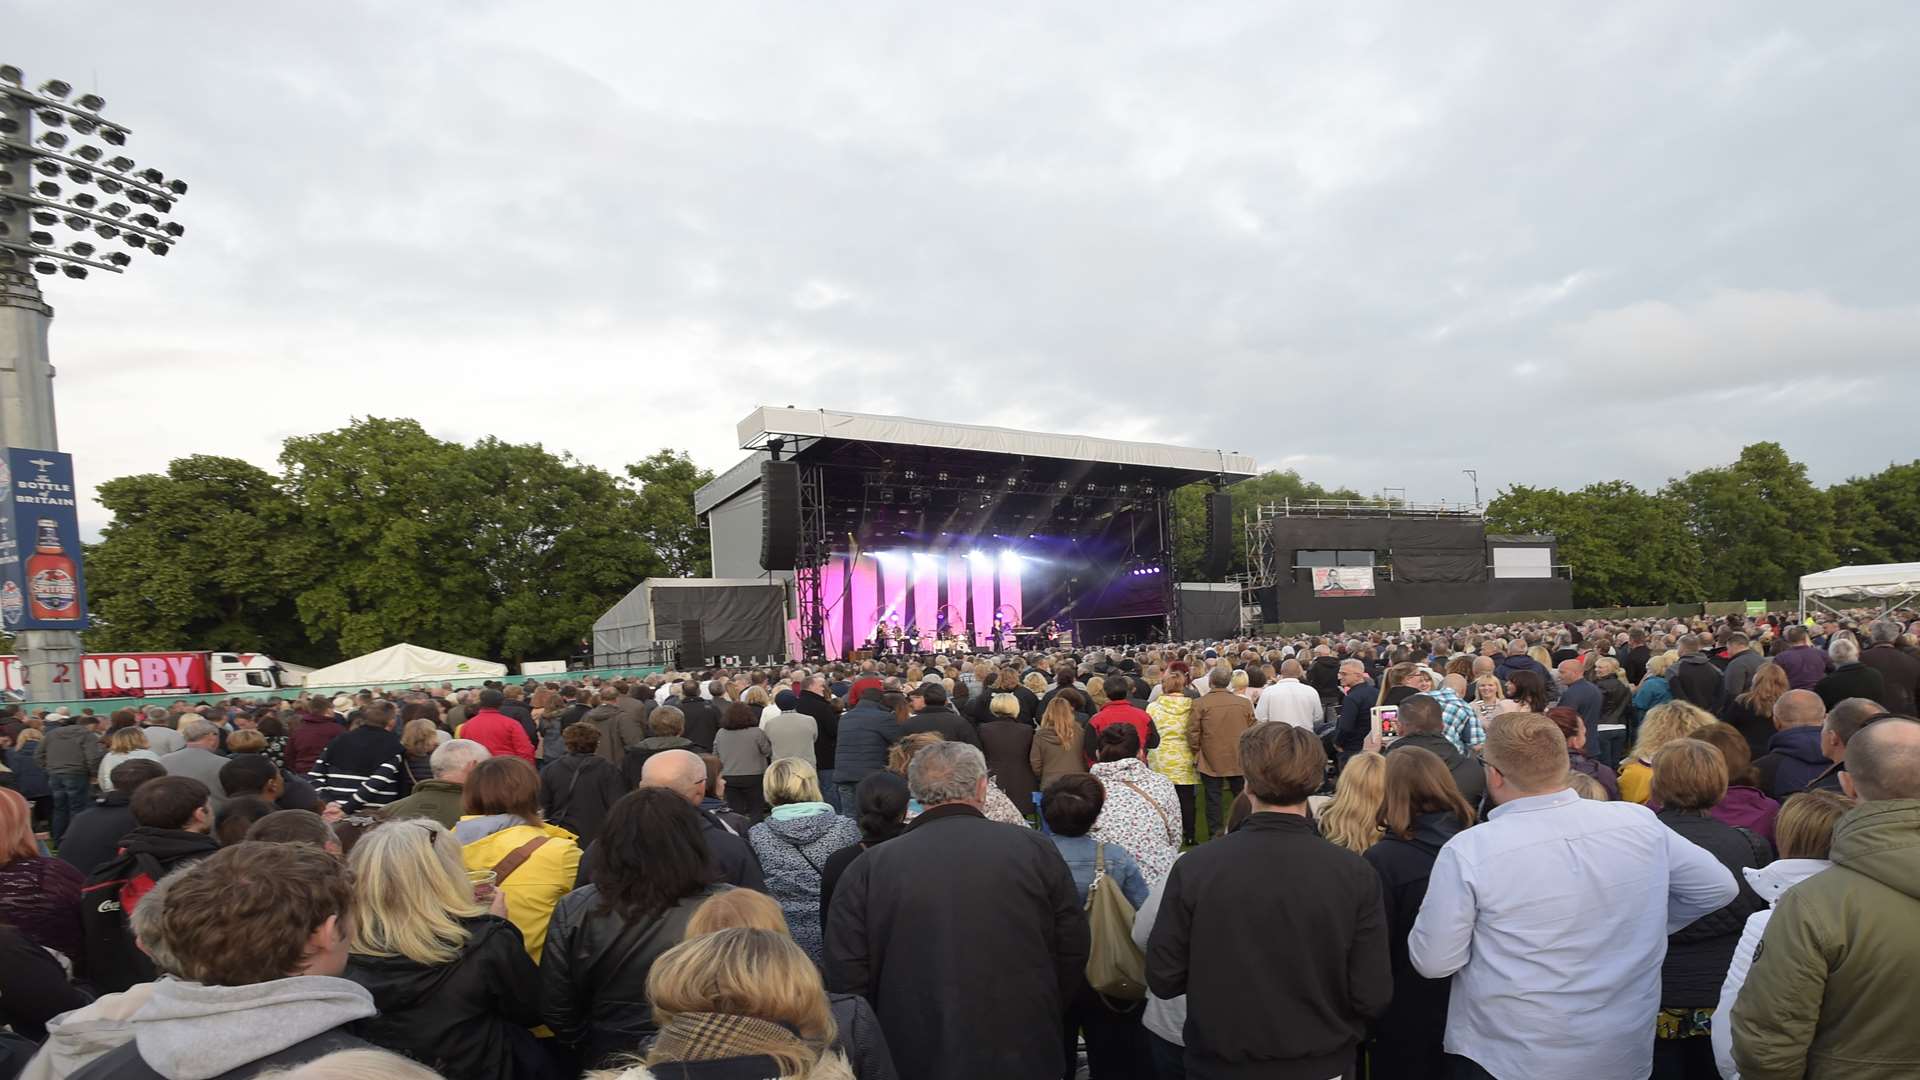 The Spitfire Ground is a popular location for open air concerts